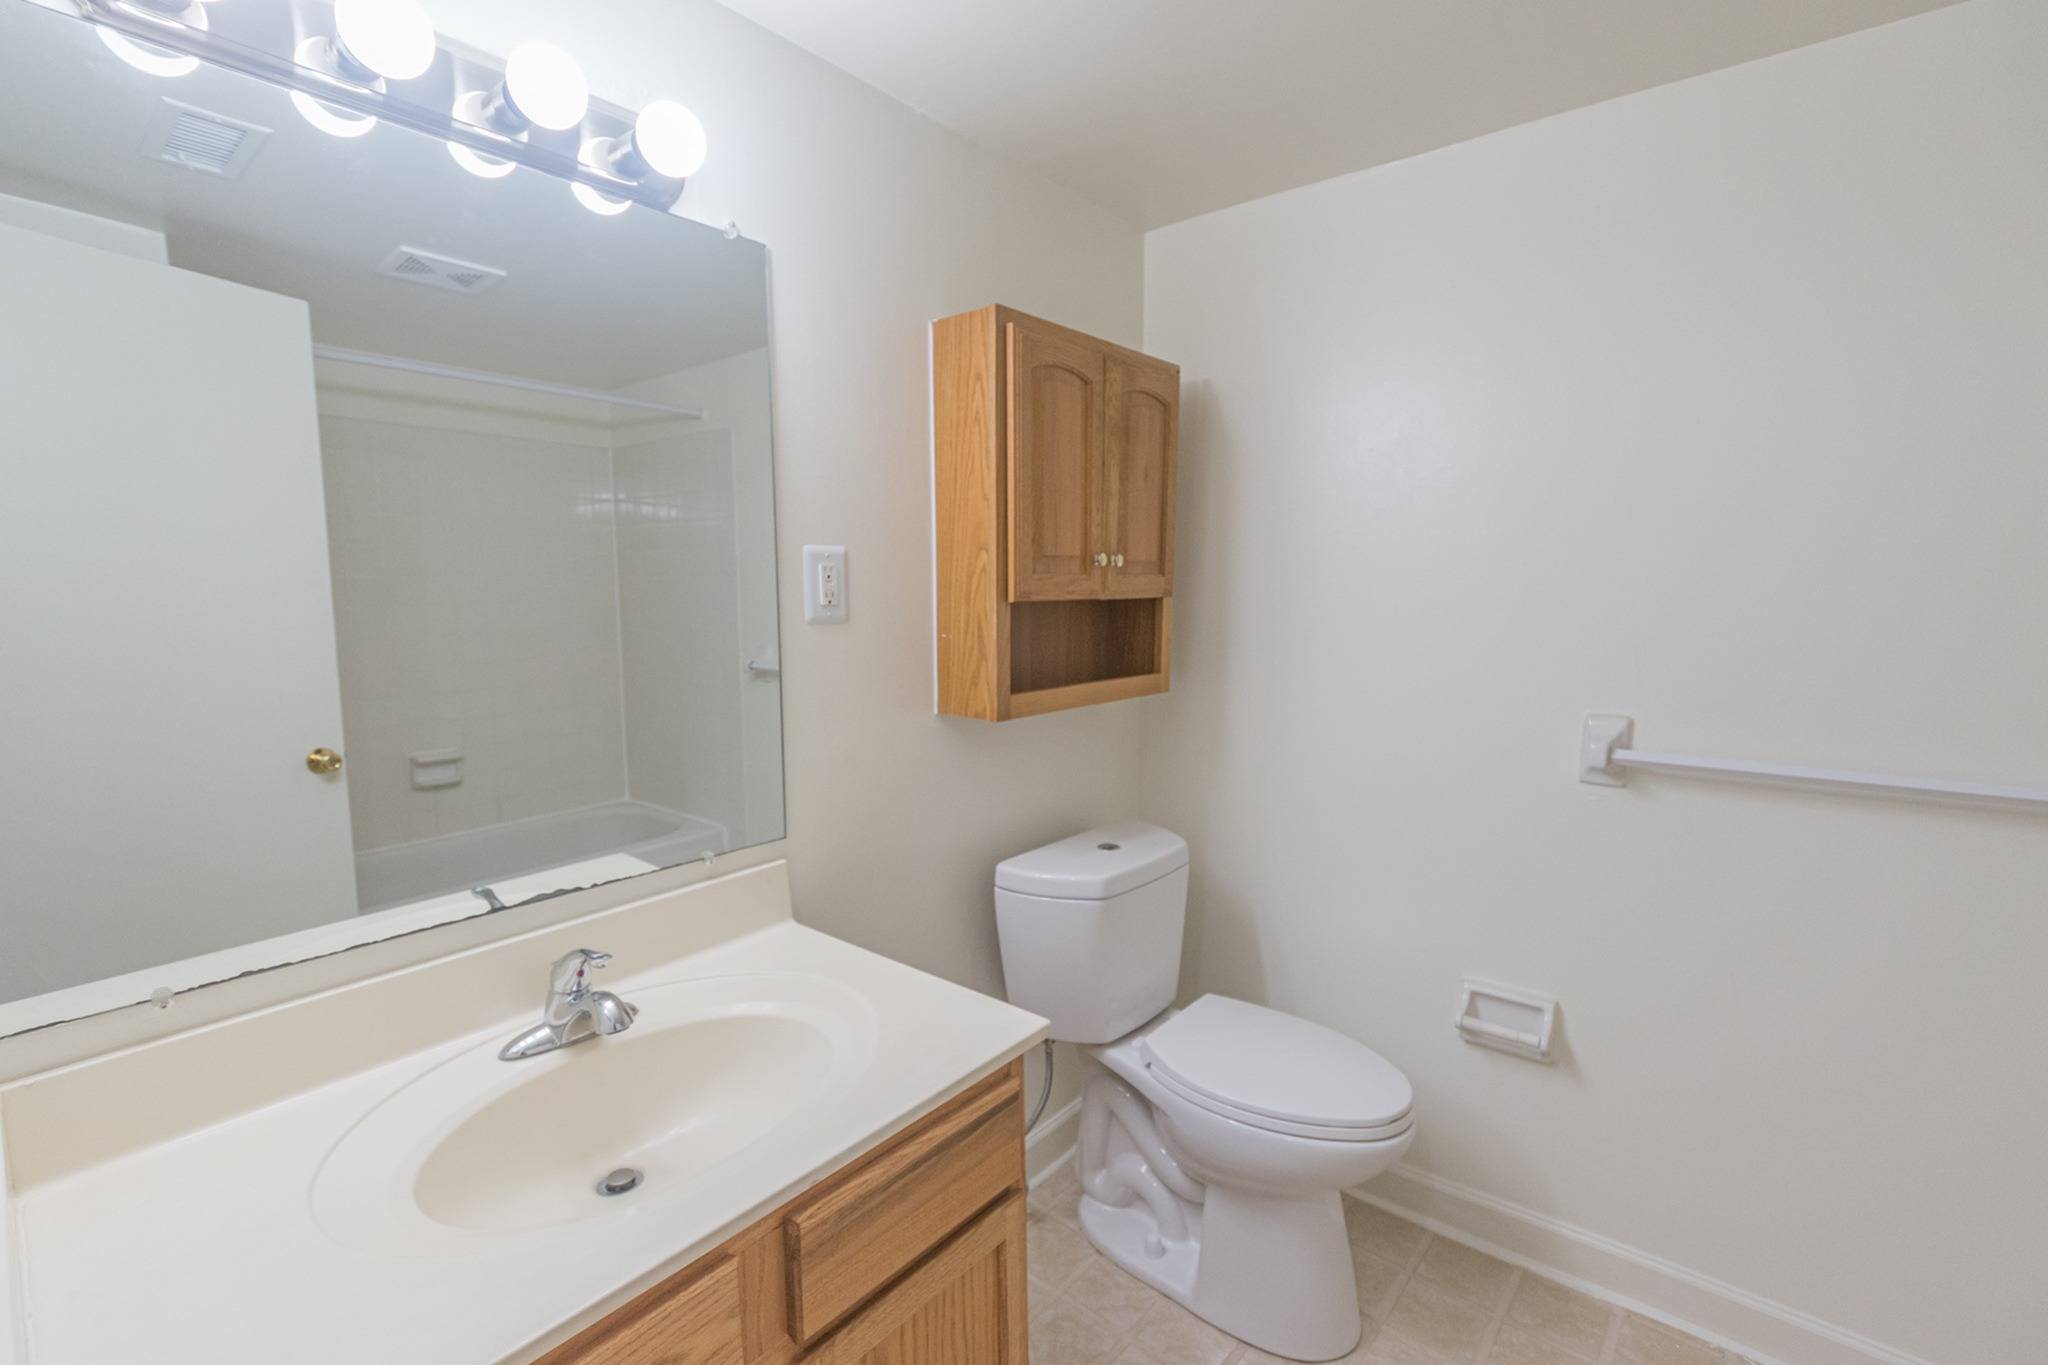 Bathroom with large mirror, toilet, and white countertops.